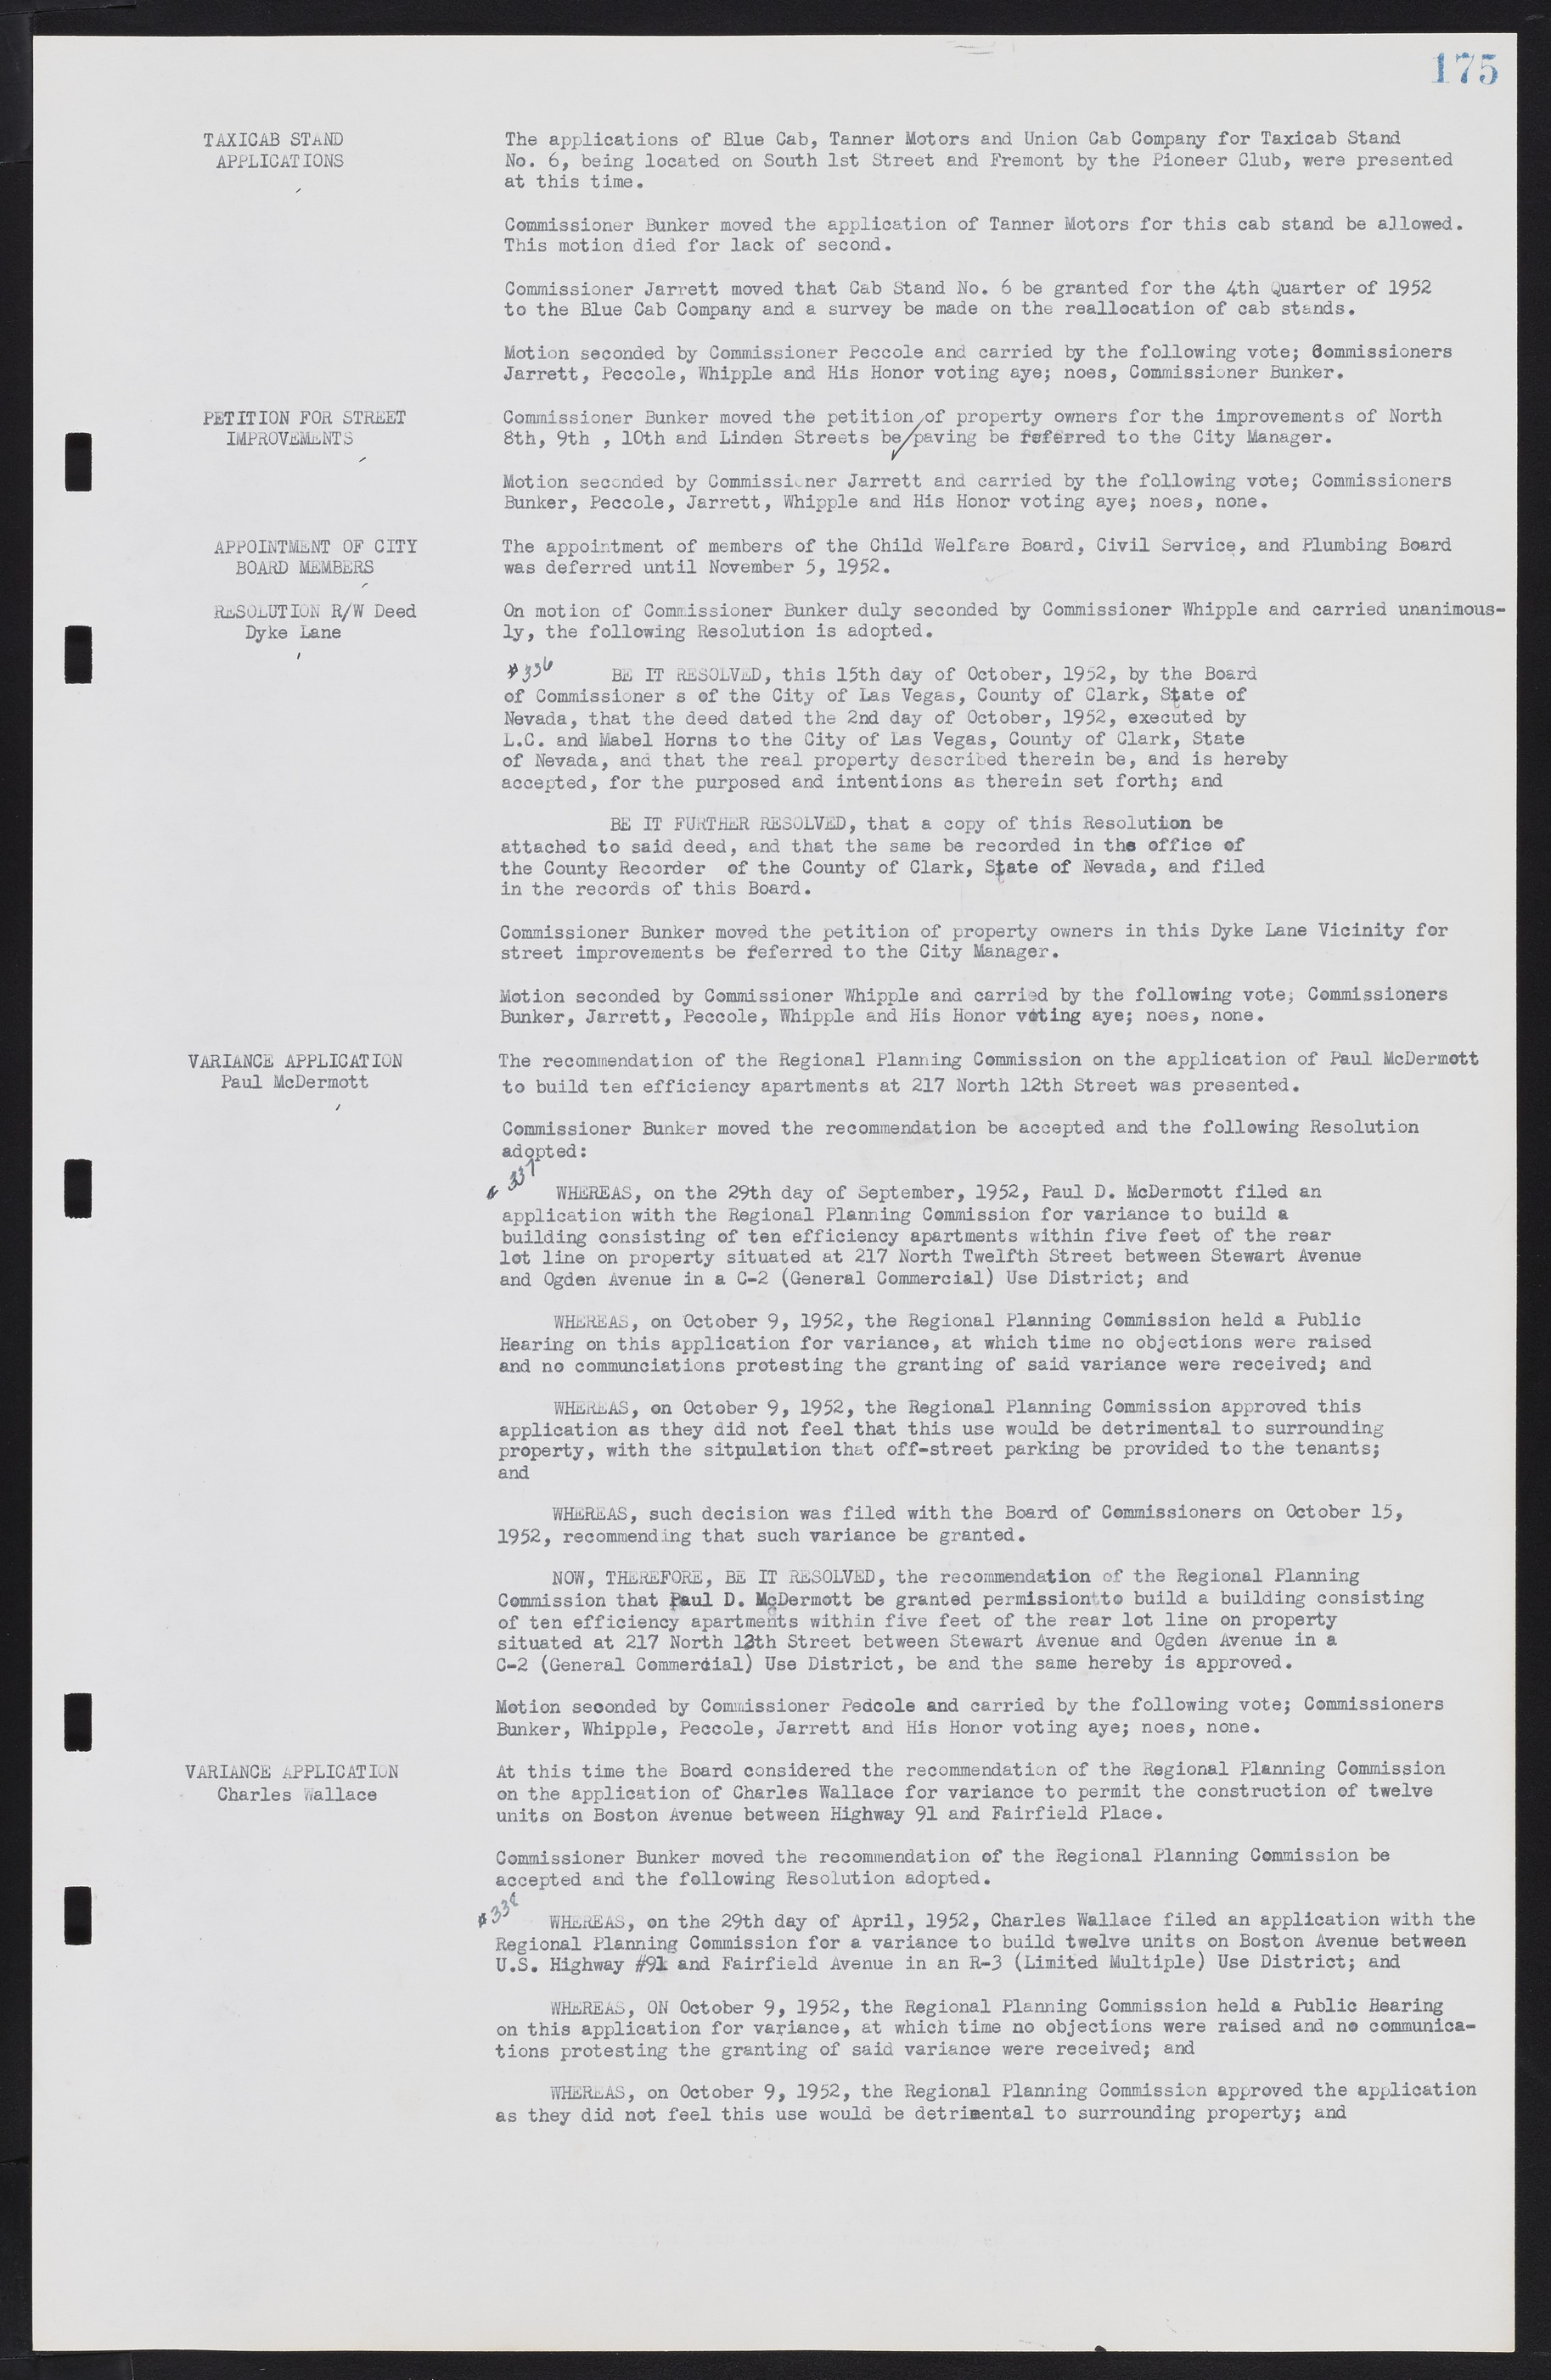 Las Vegas City Commission Minutes, May 26, 1952 to February 17, 1954, lvc000008-189